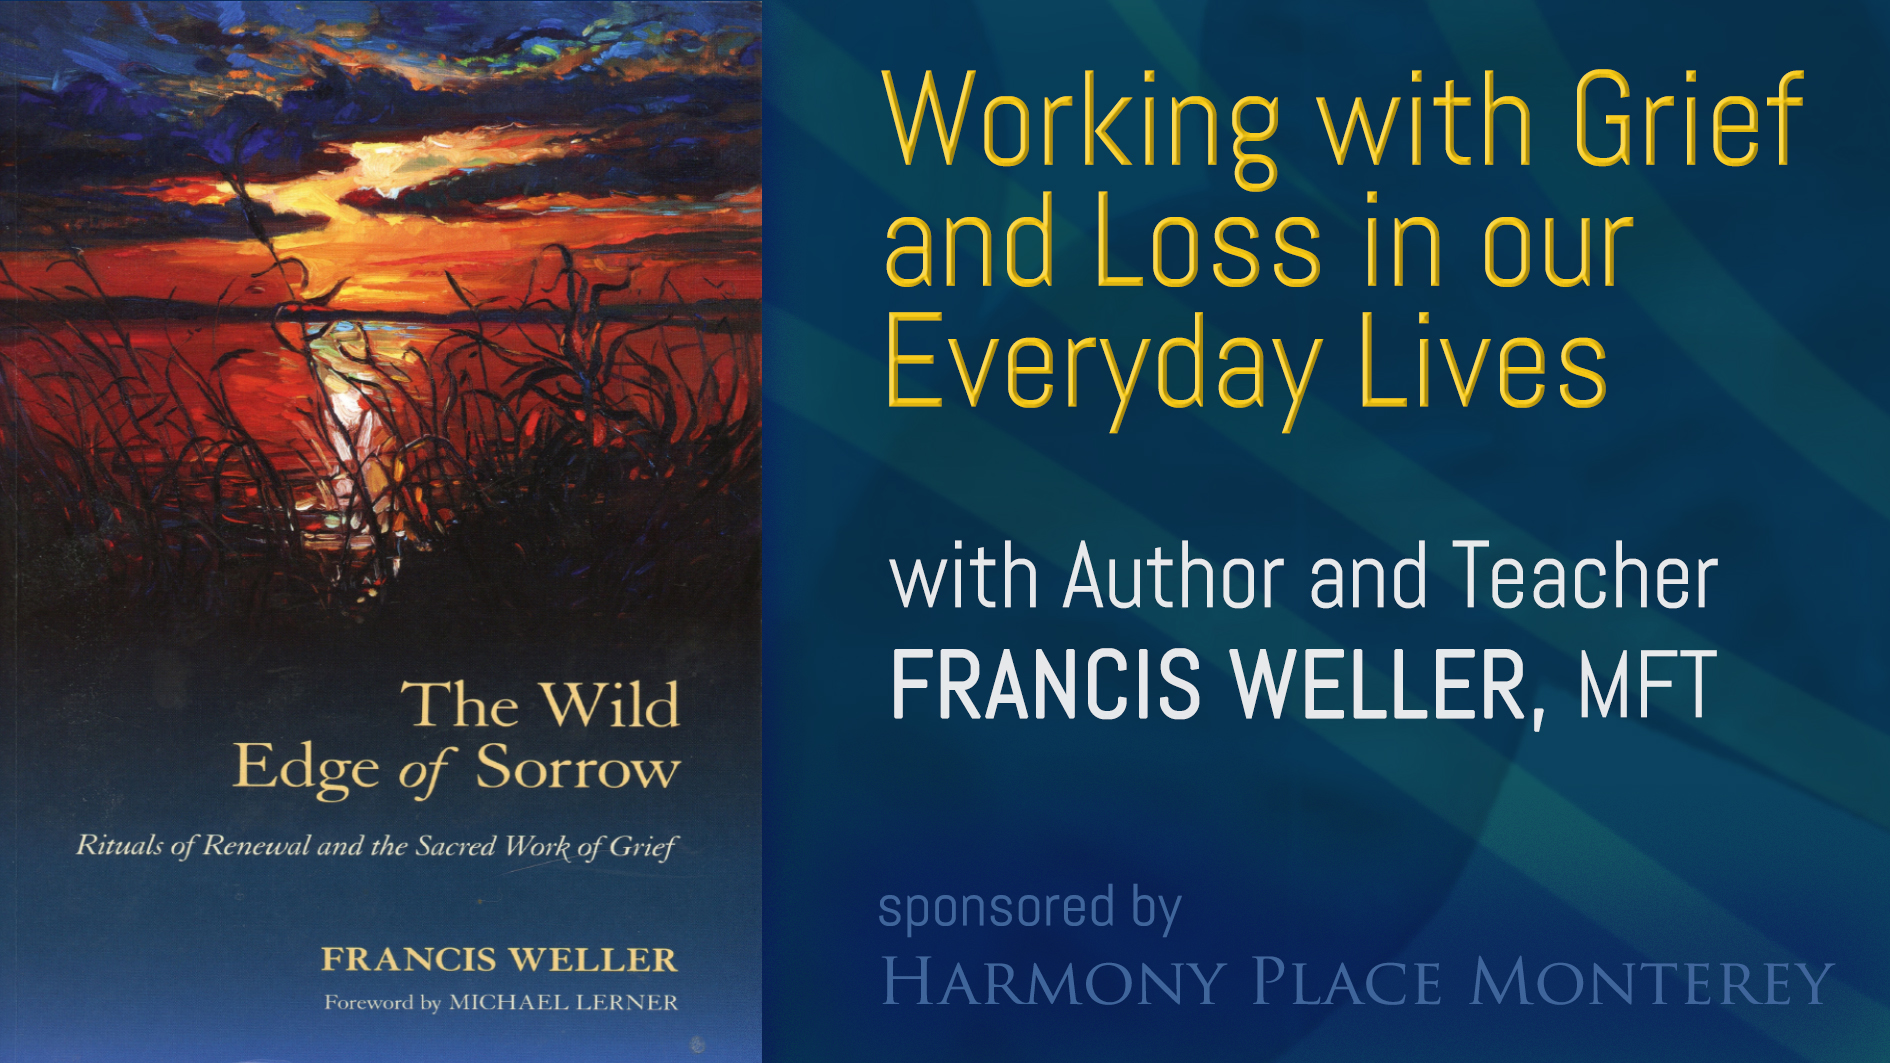 WORKSHOP VIDEO: The Wild Edge of Sorrow, with Author Francis Weller, MFT